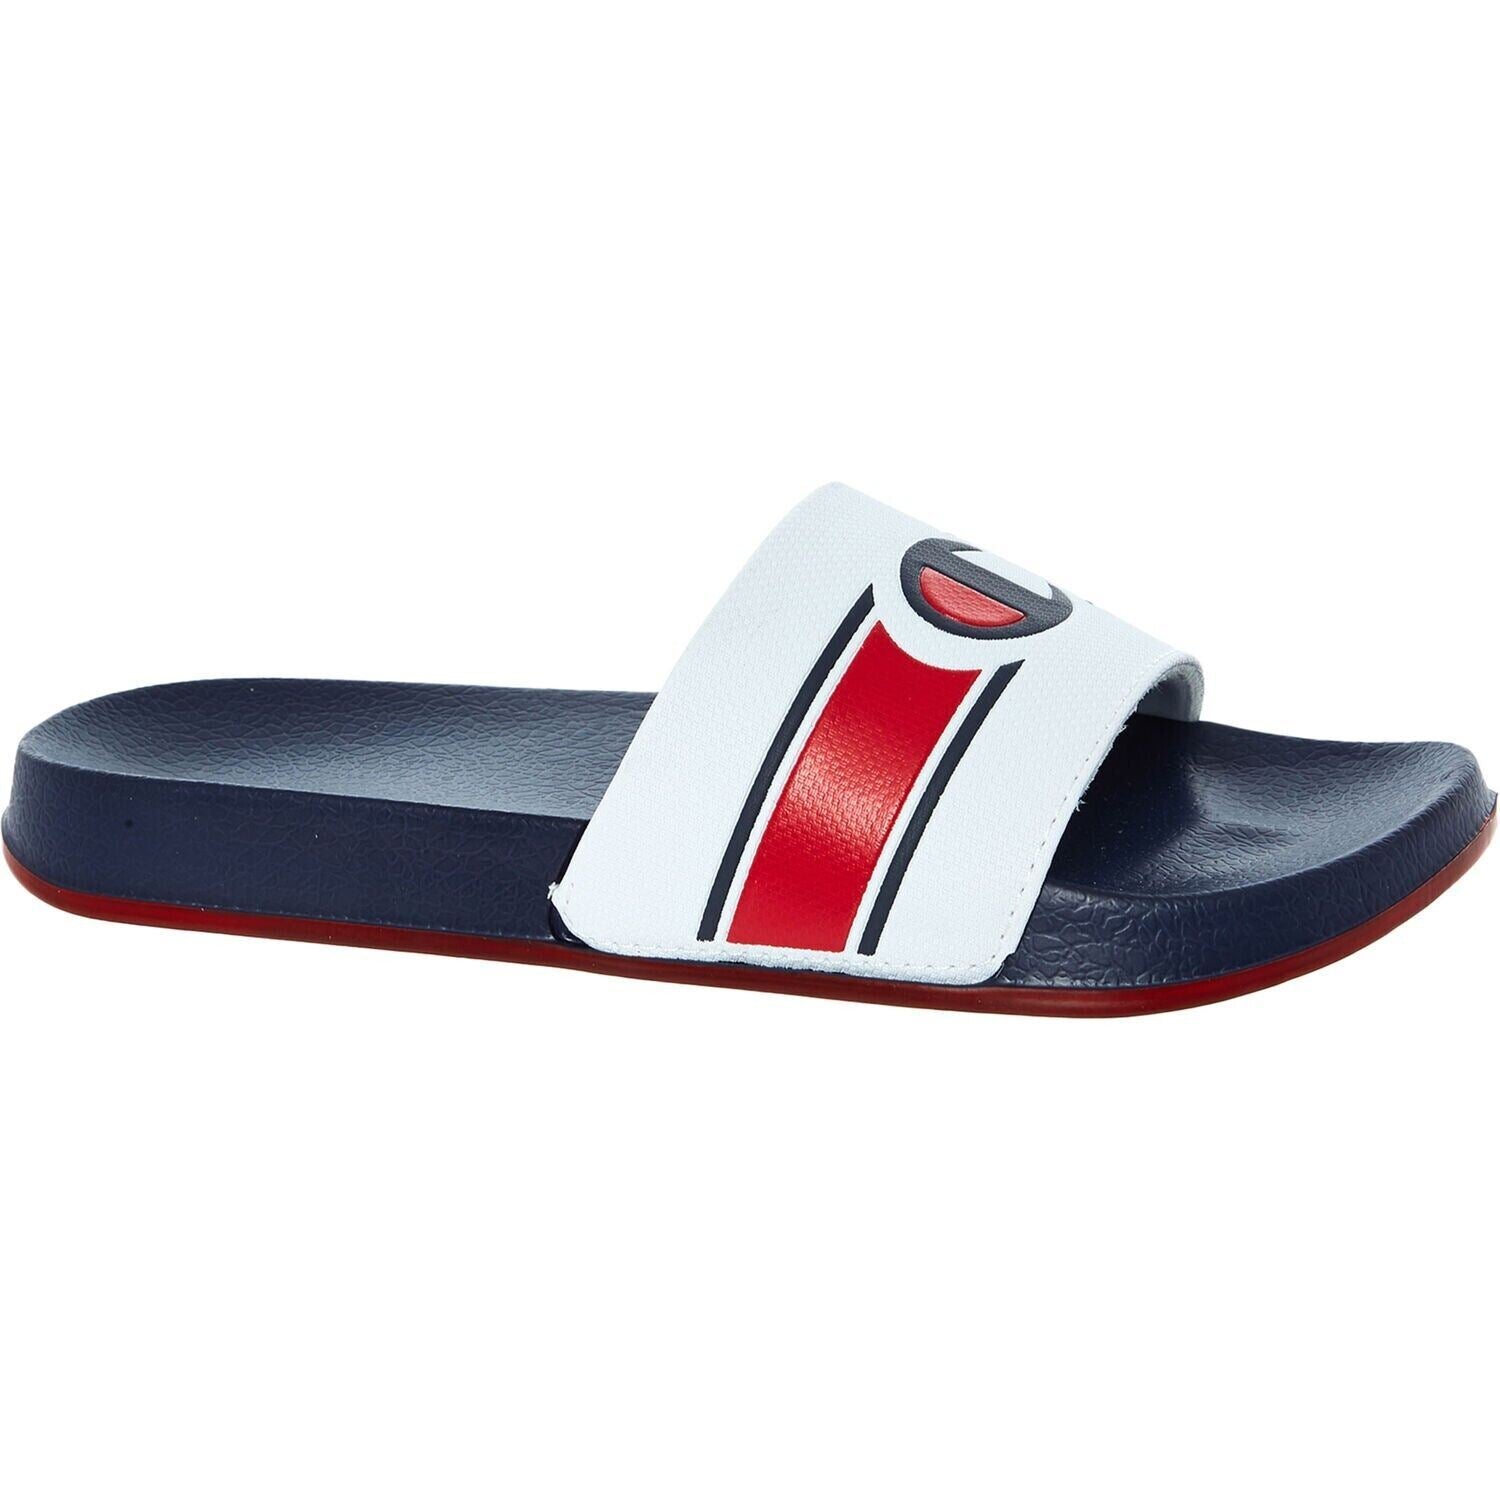 CHAMPION - CONNOR Womens Pool Sliders Summer Sandals, Navy/White, size UK 4